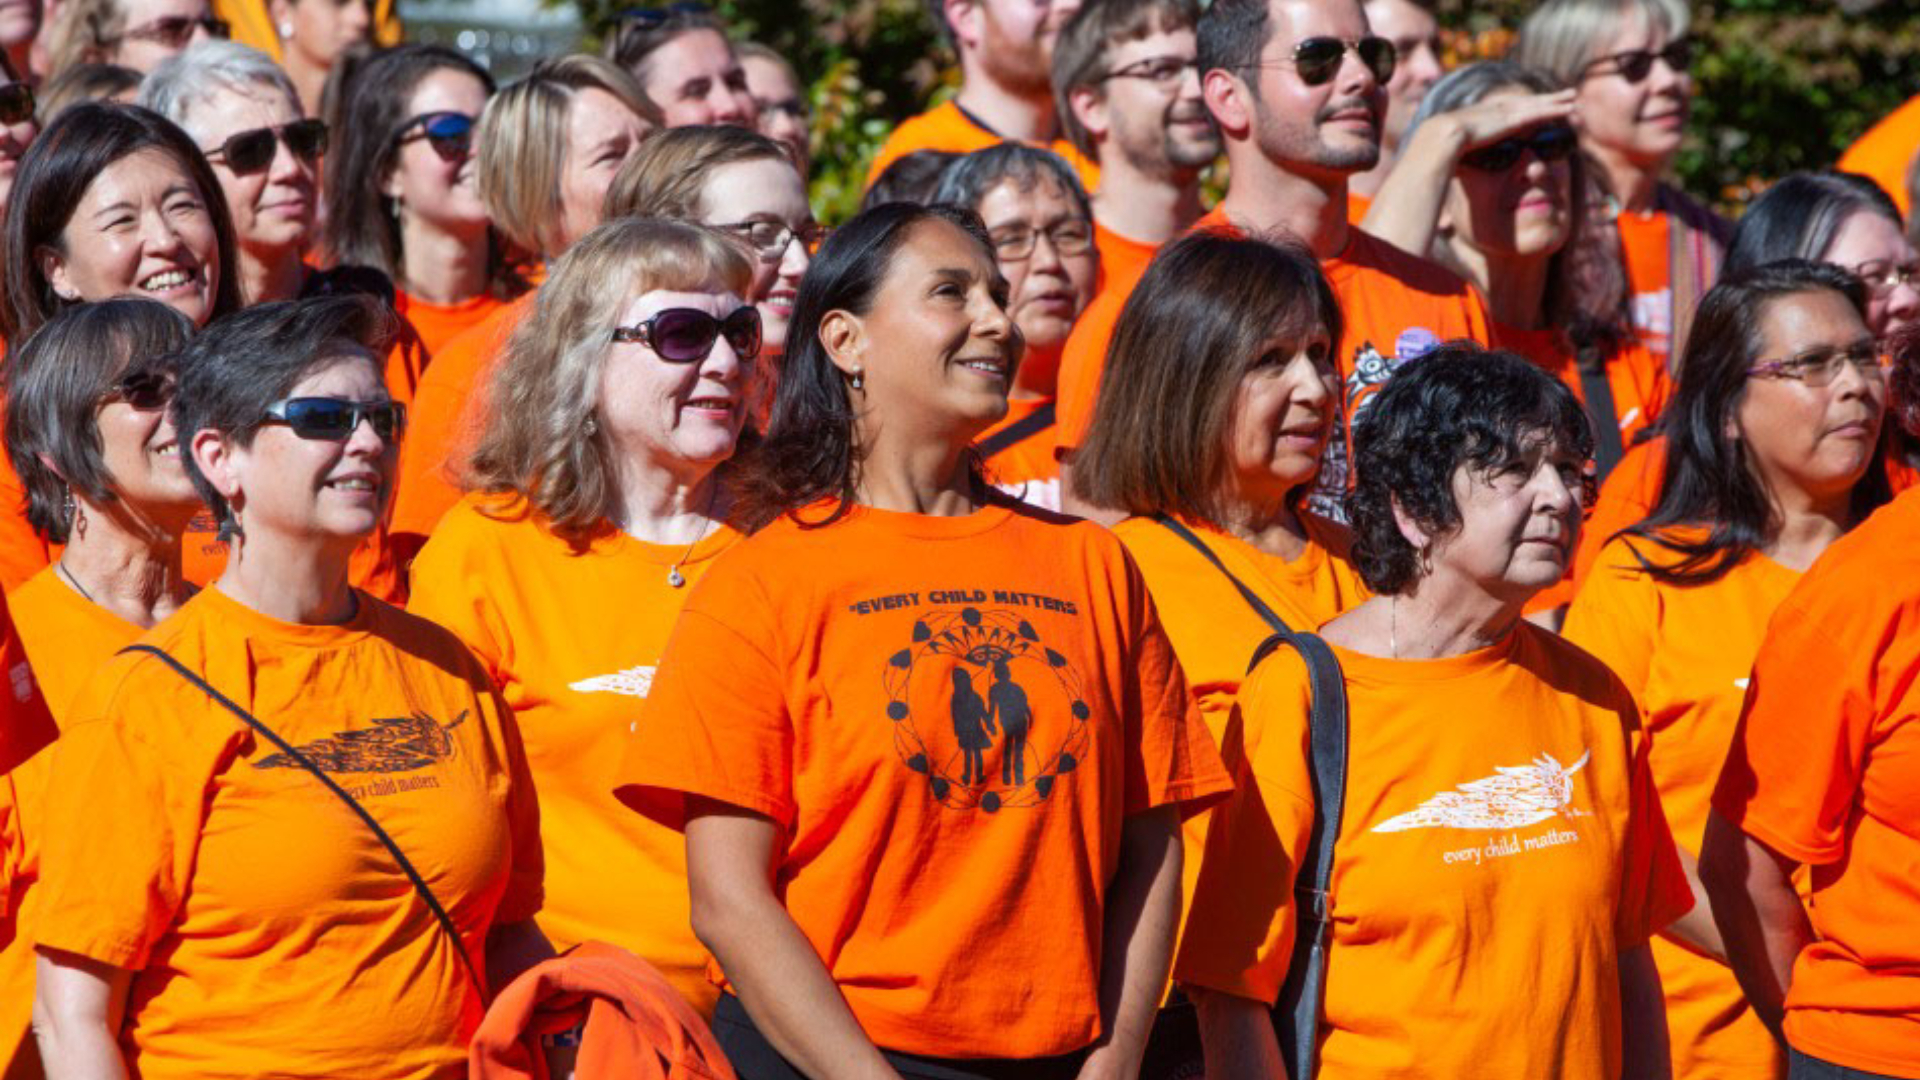 The impact and meaning of Orange Shirt Day